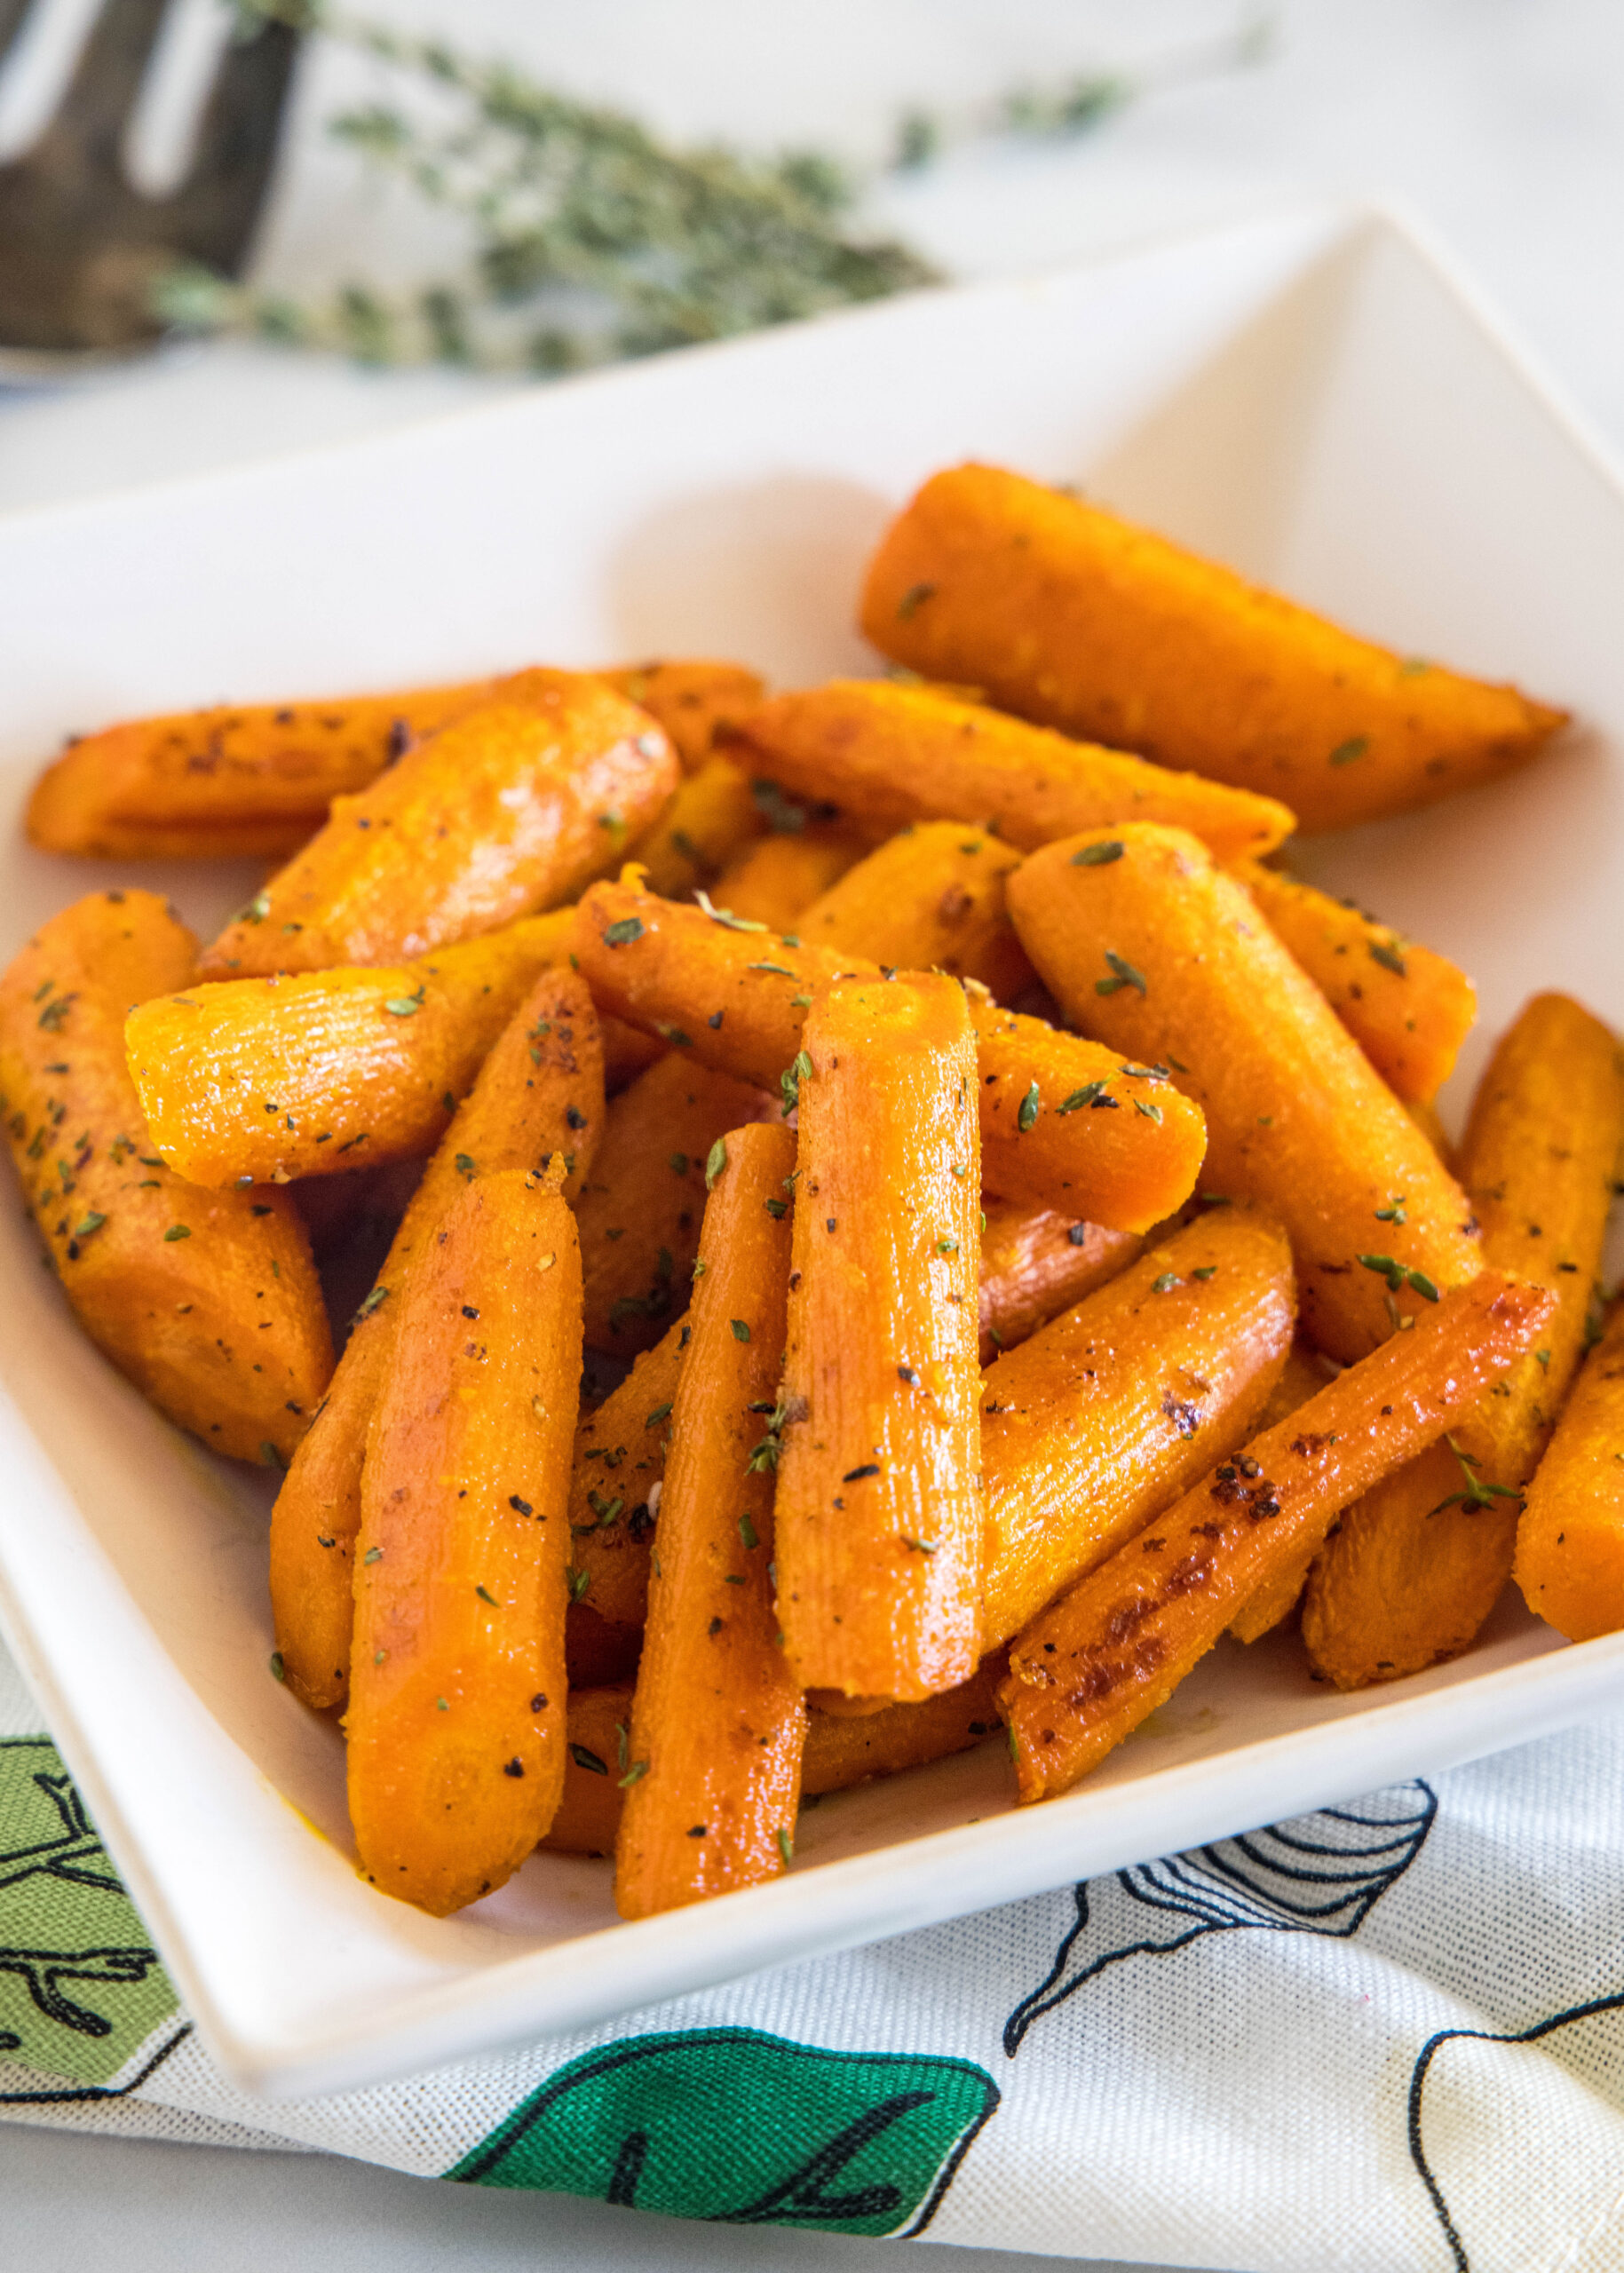 Seasoned roasted carrots in a square white bowl.